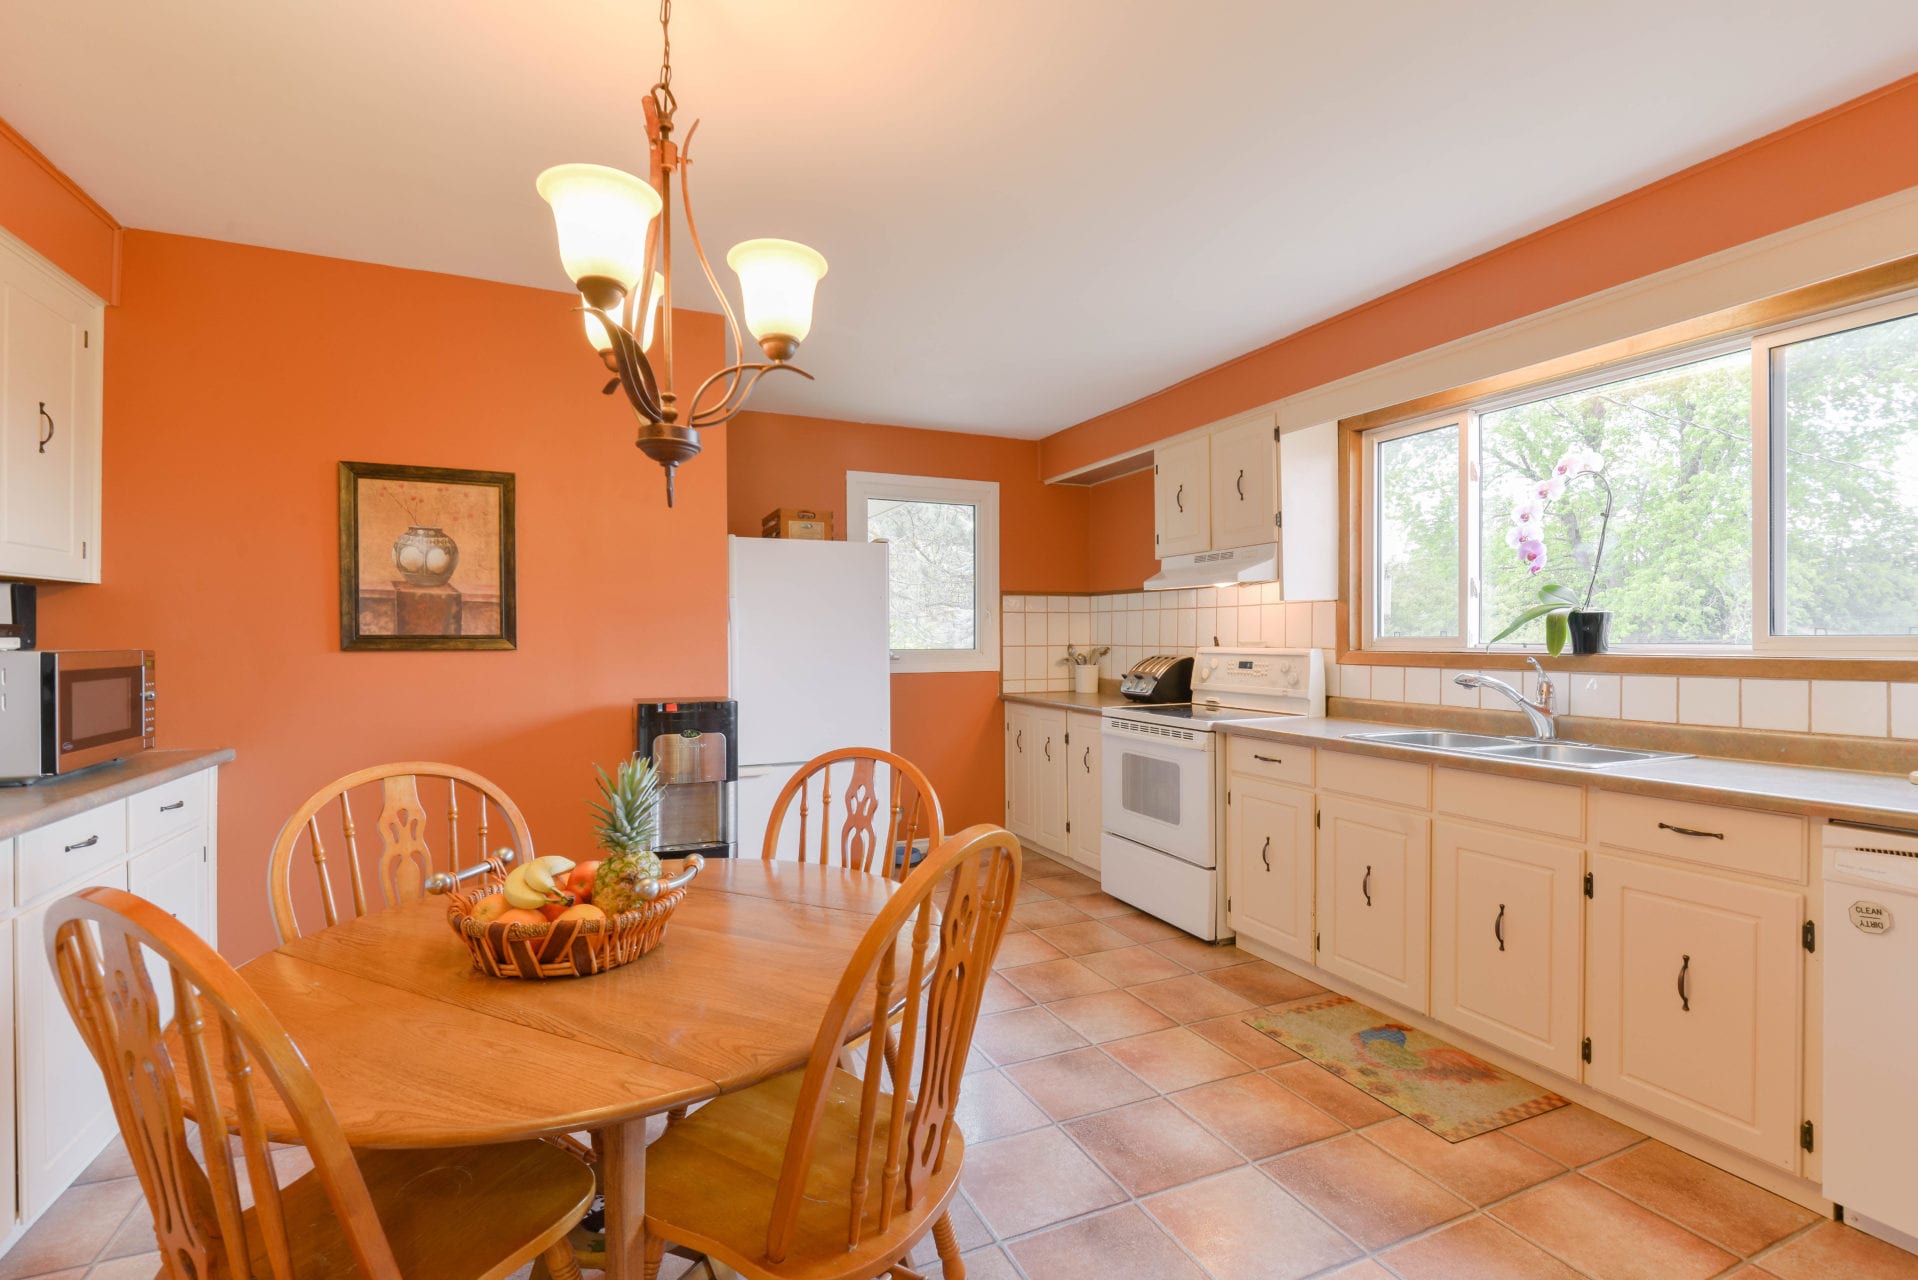 Kitchen with dinning table